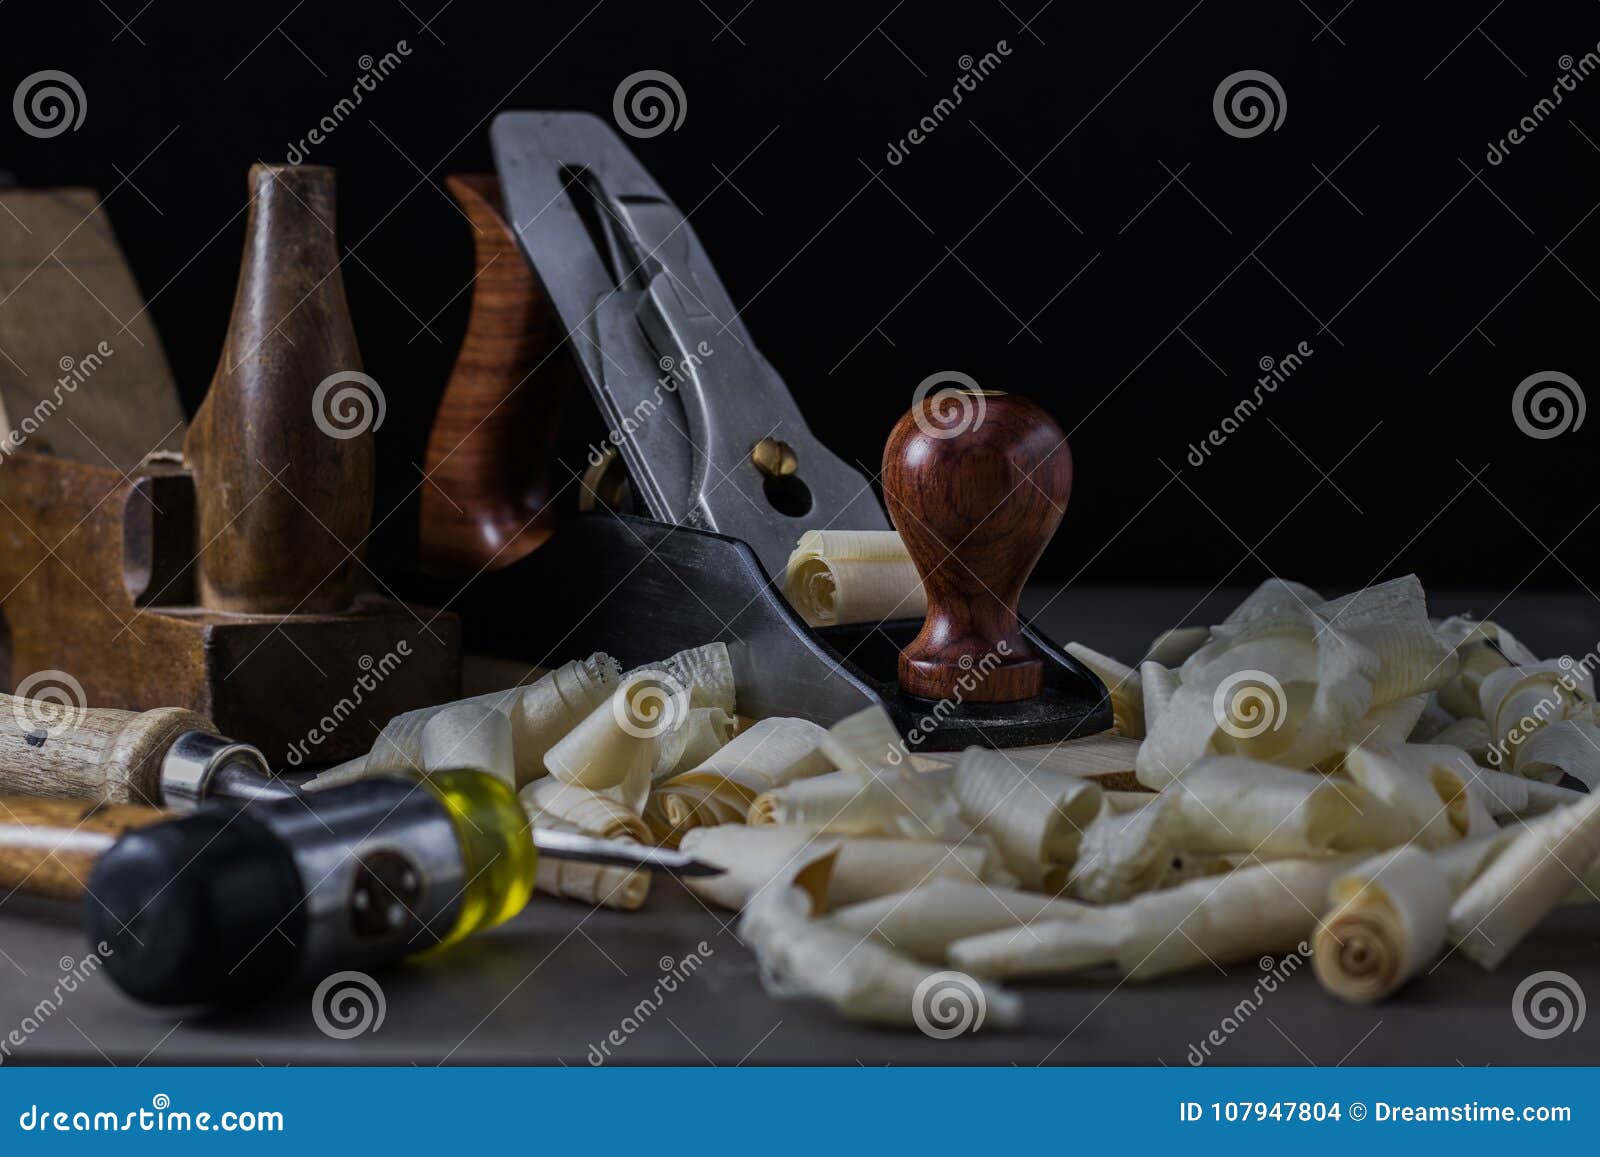 Old Carving Woodworking Tools Wood Shavings Vintage Workbench Carpentry  Woodworking Stock Photo by ©stokkete 176819088